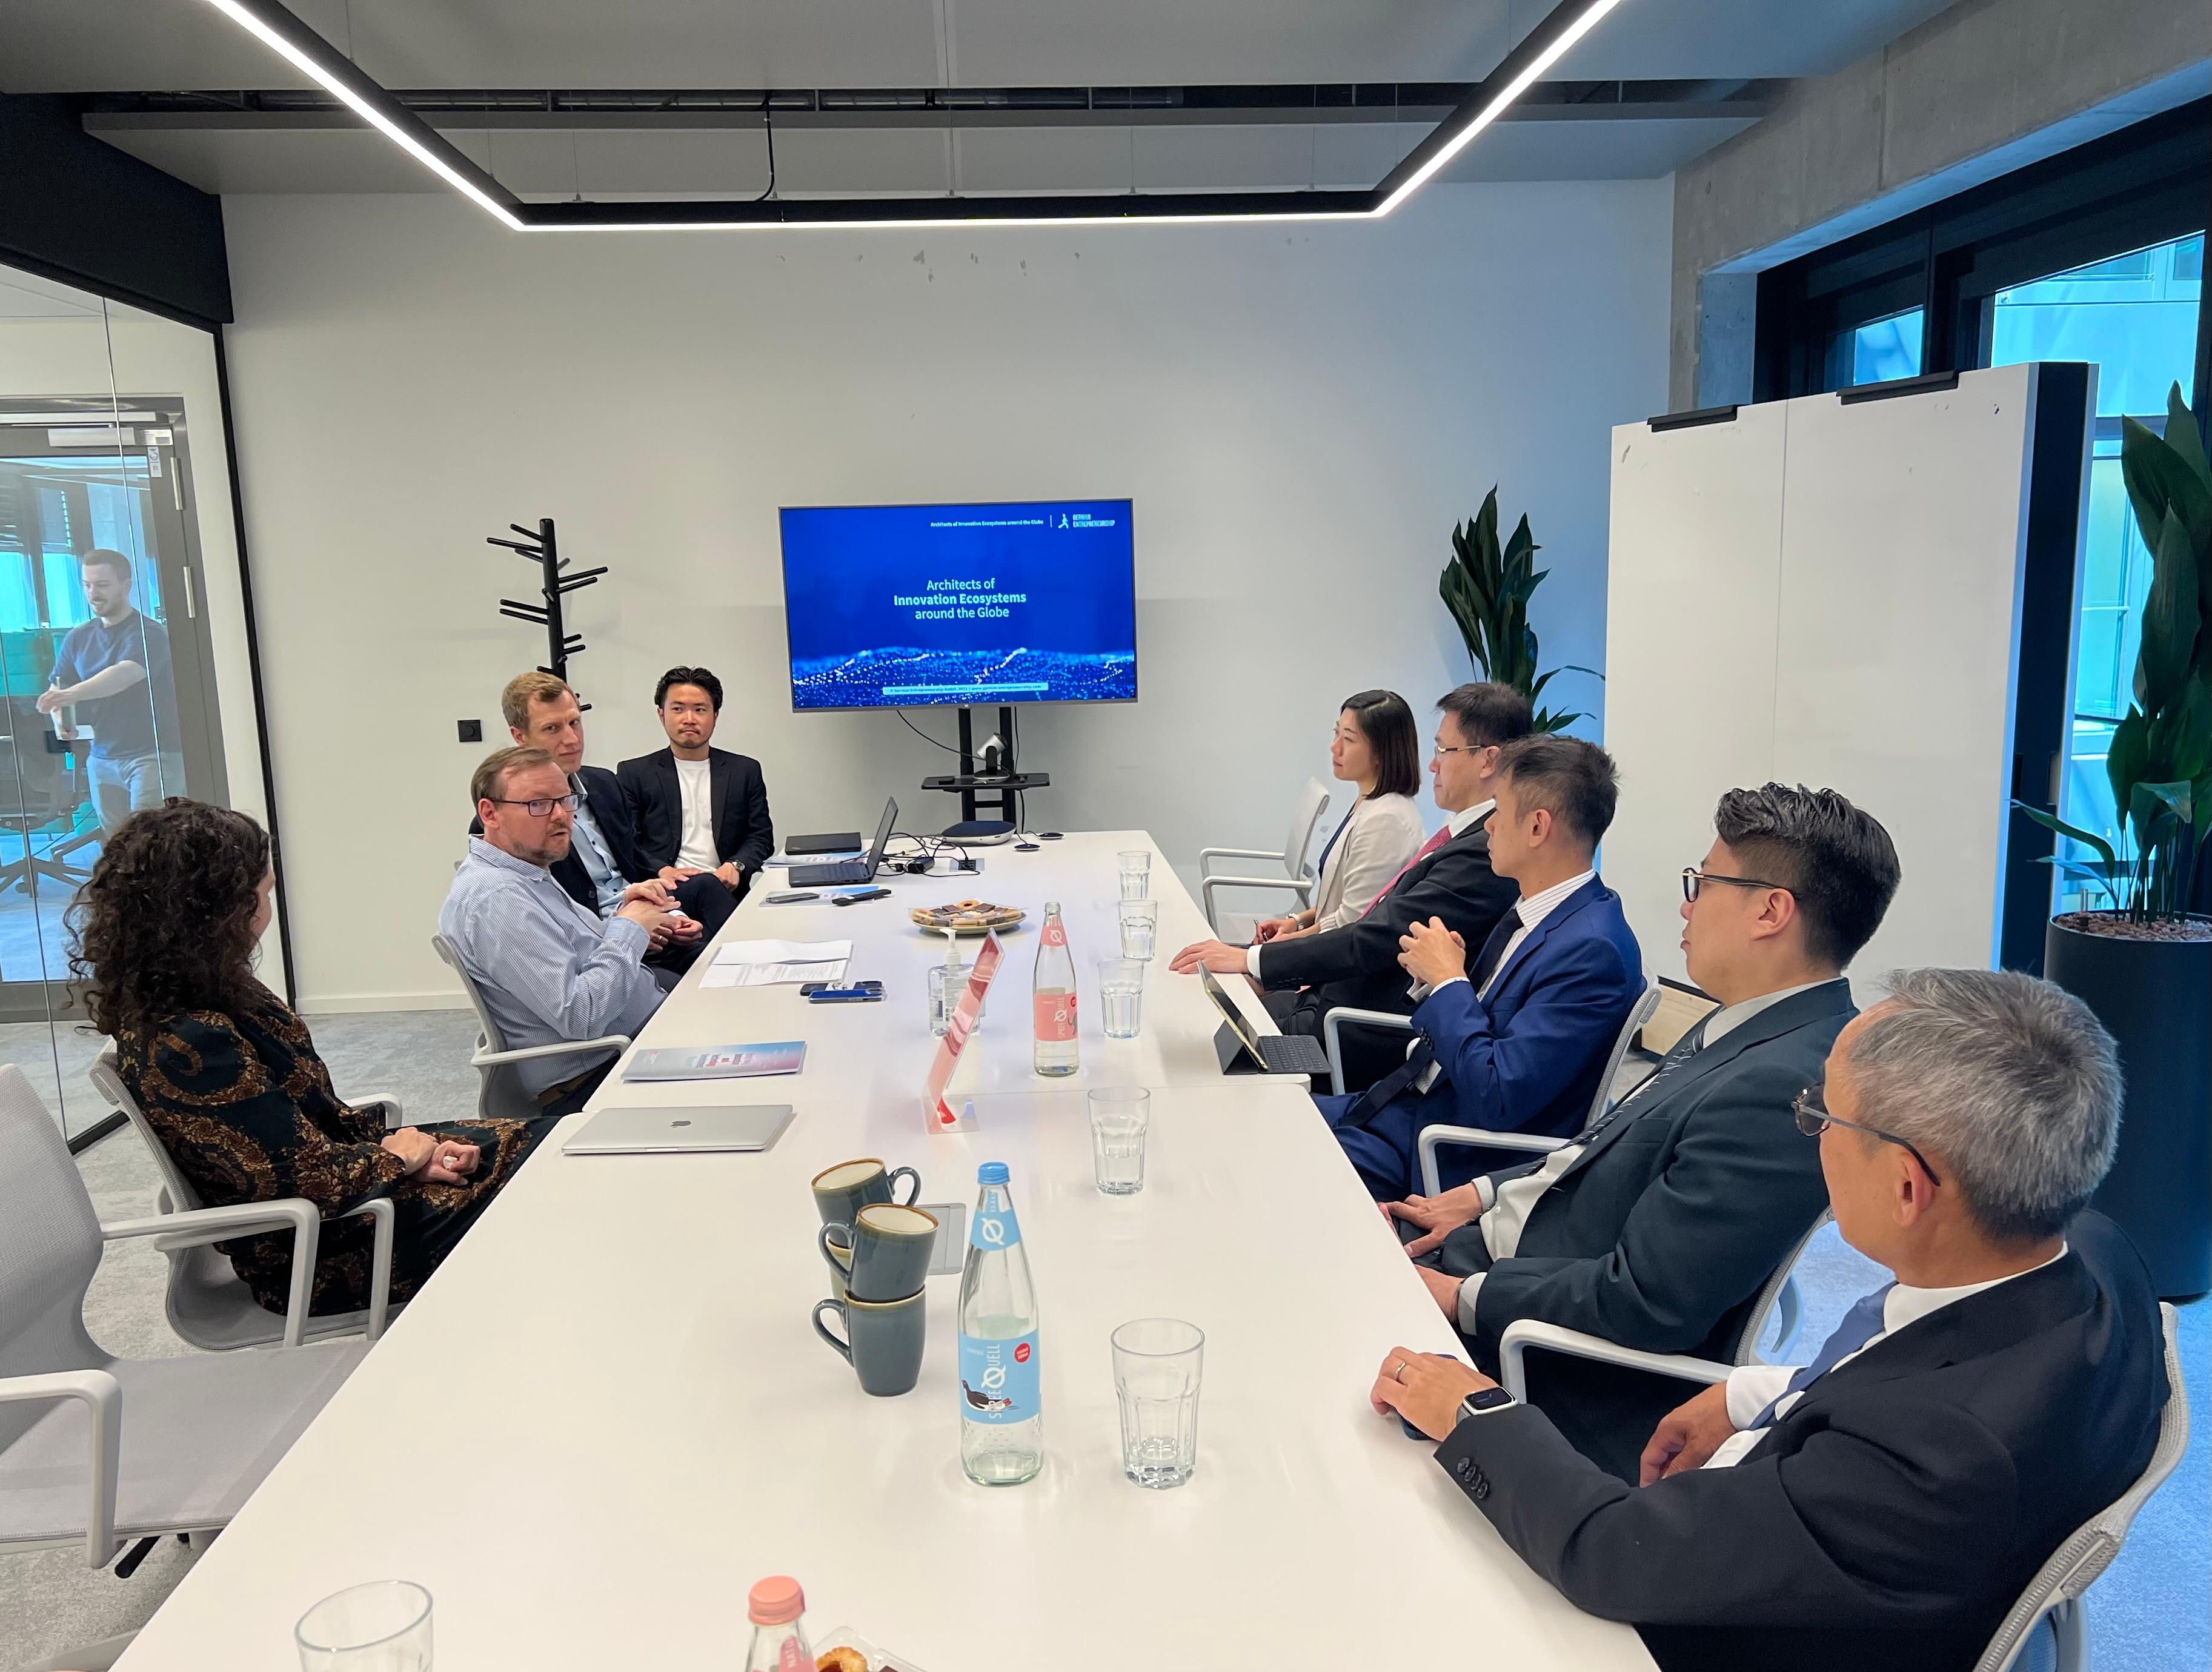 The Secretary for Innovation, Technology and Industry, Professor Sun Dong (fourth right), visited German Accelerator and was briefed on how it helped startups to achieve international growth and success in Berlin, Germany yesterday (June 12, Berlin time).
